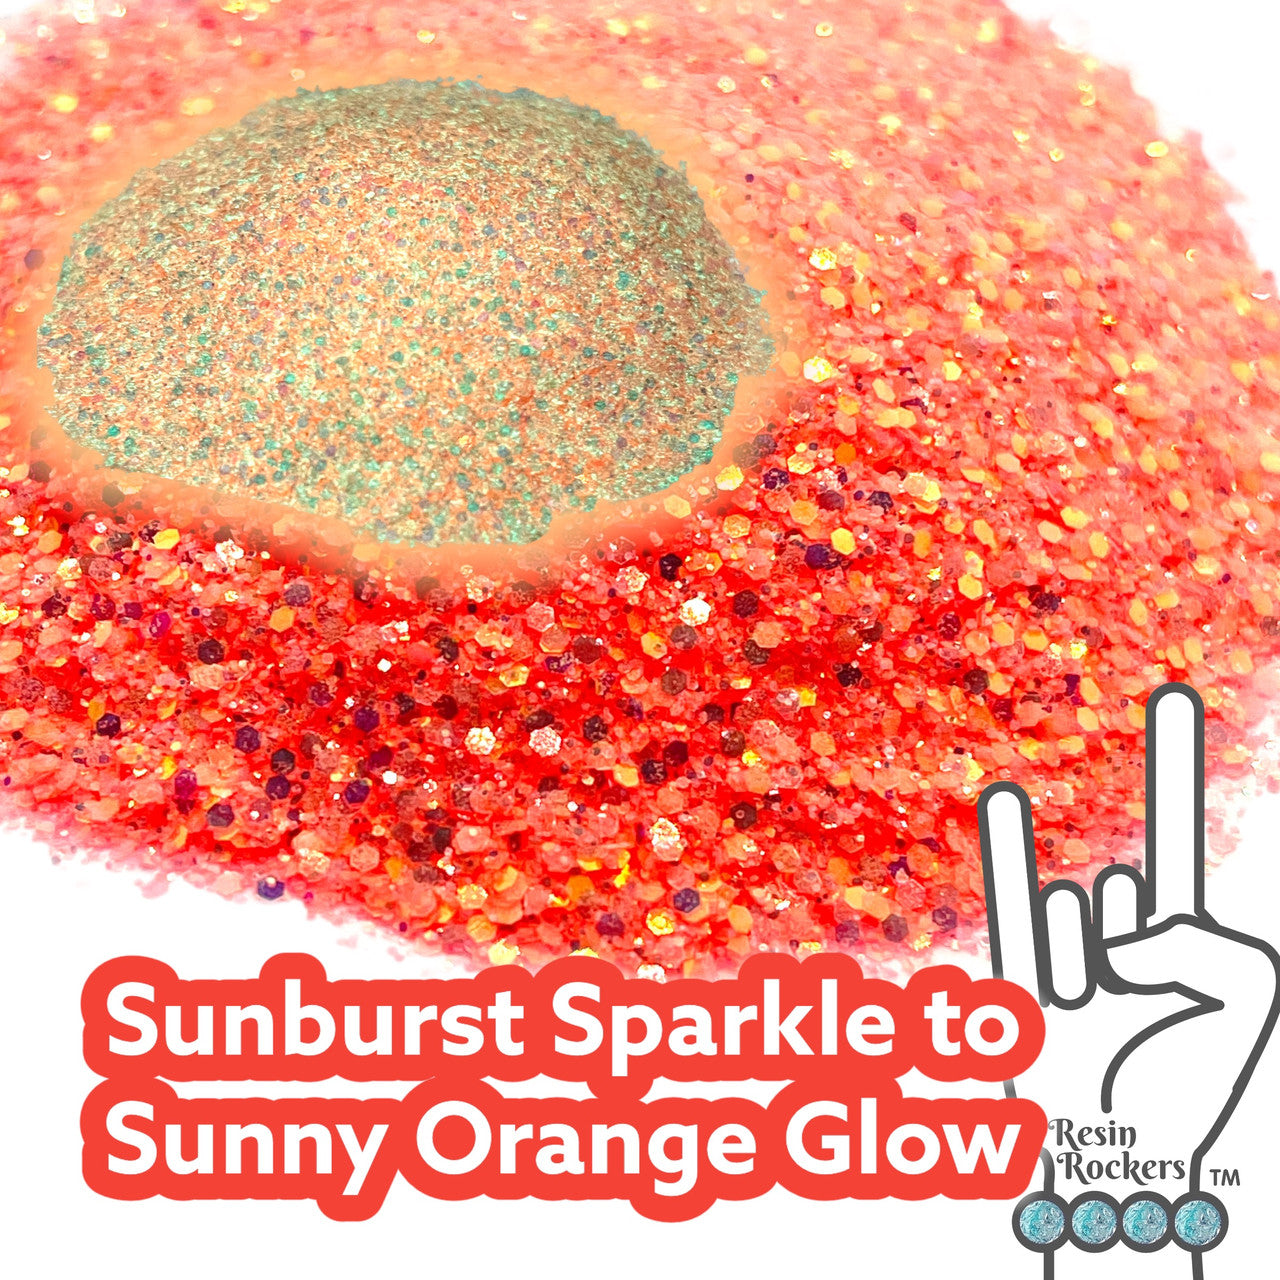 Glamour and Sunburst Sparkle to Sunny Orange Glow in the Dark Pixie for Poxy Color Changing Medium Chunky Glitter Mix